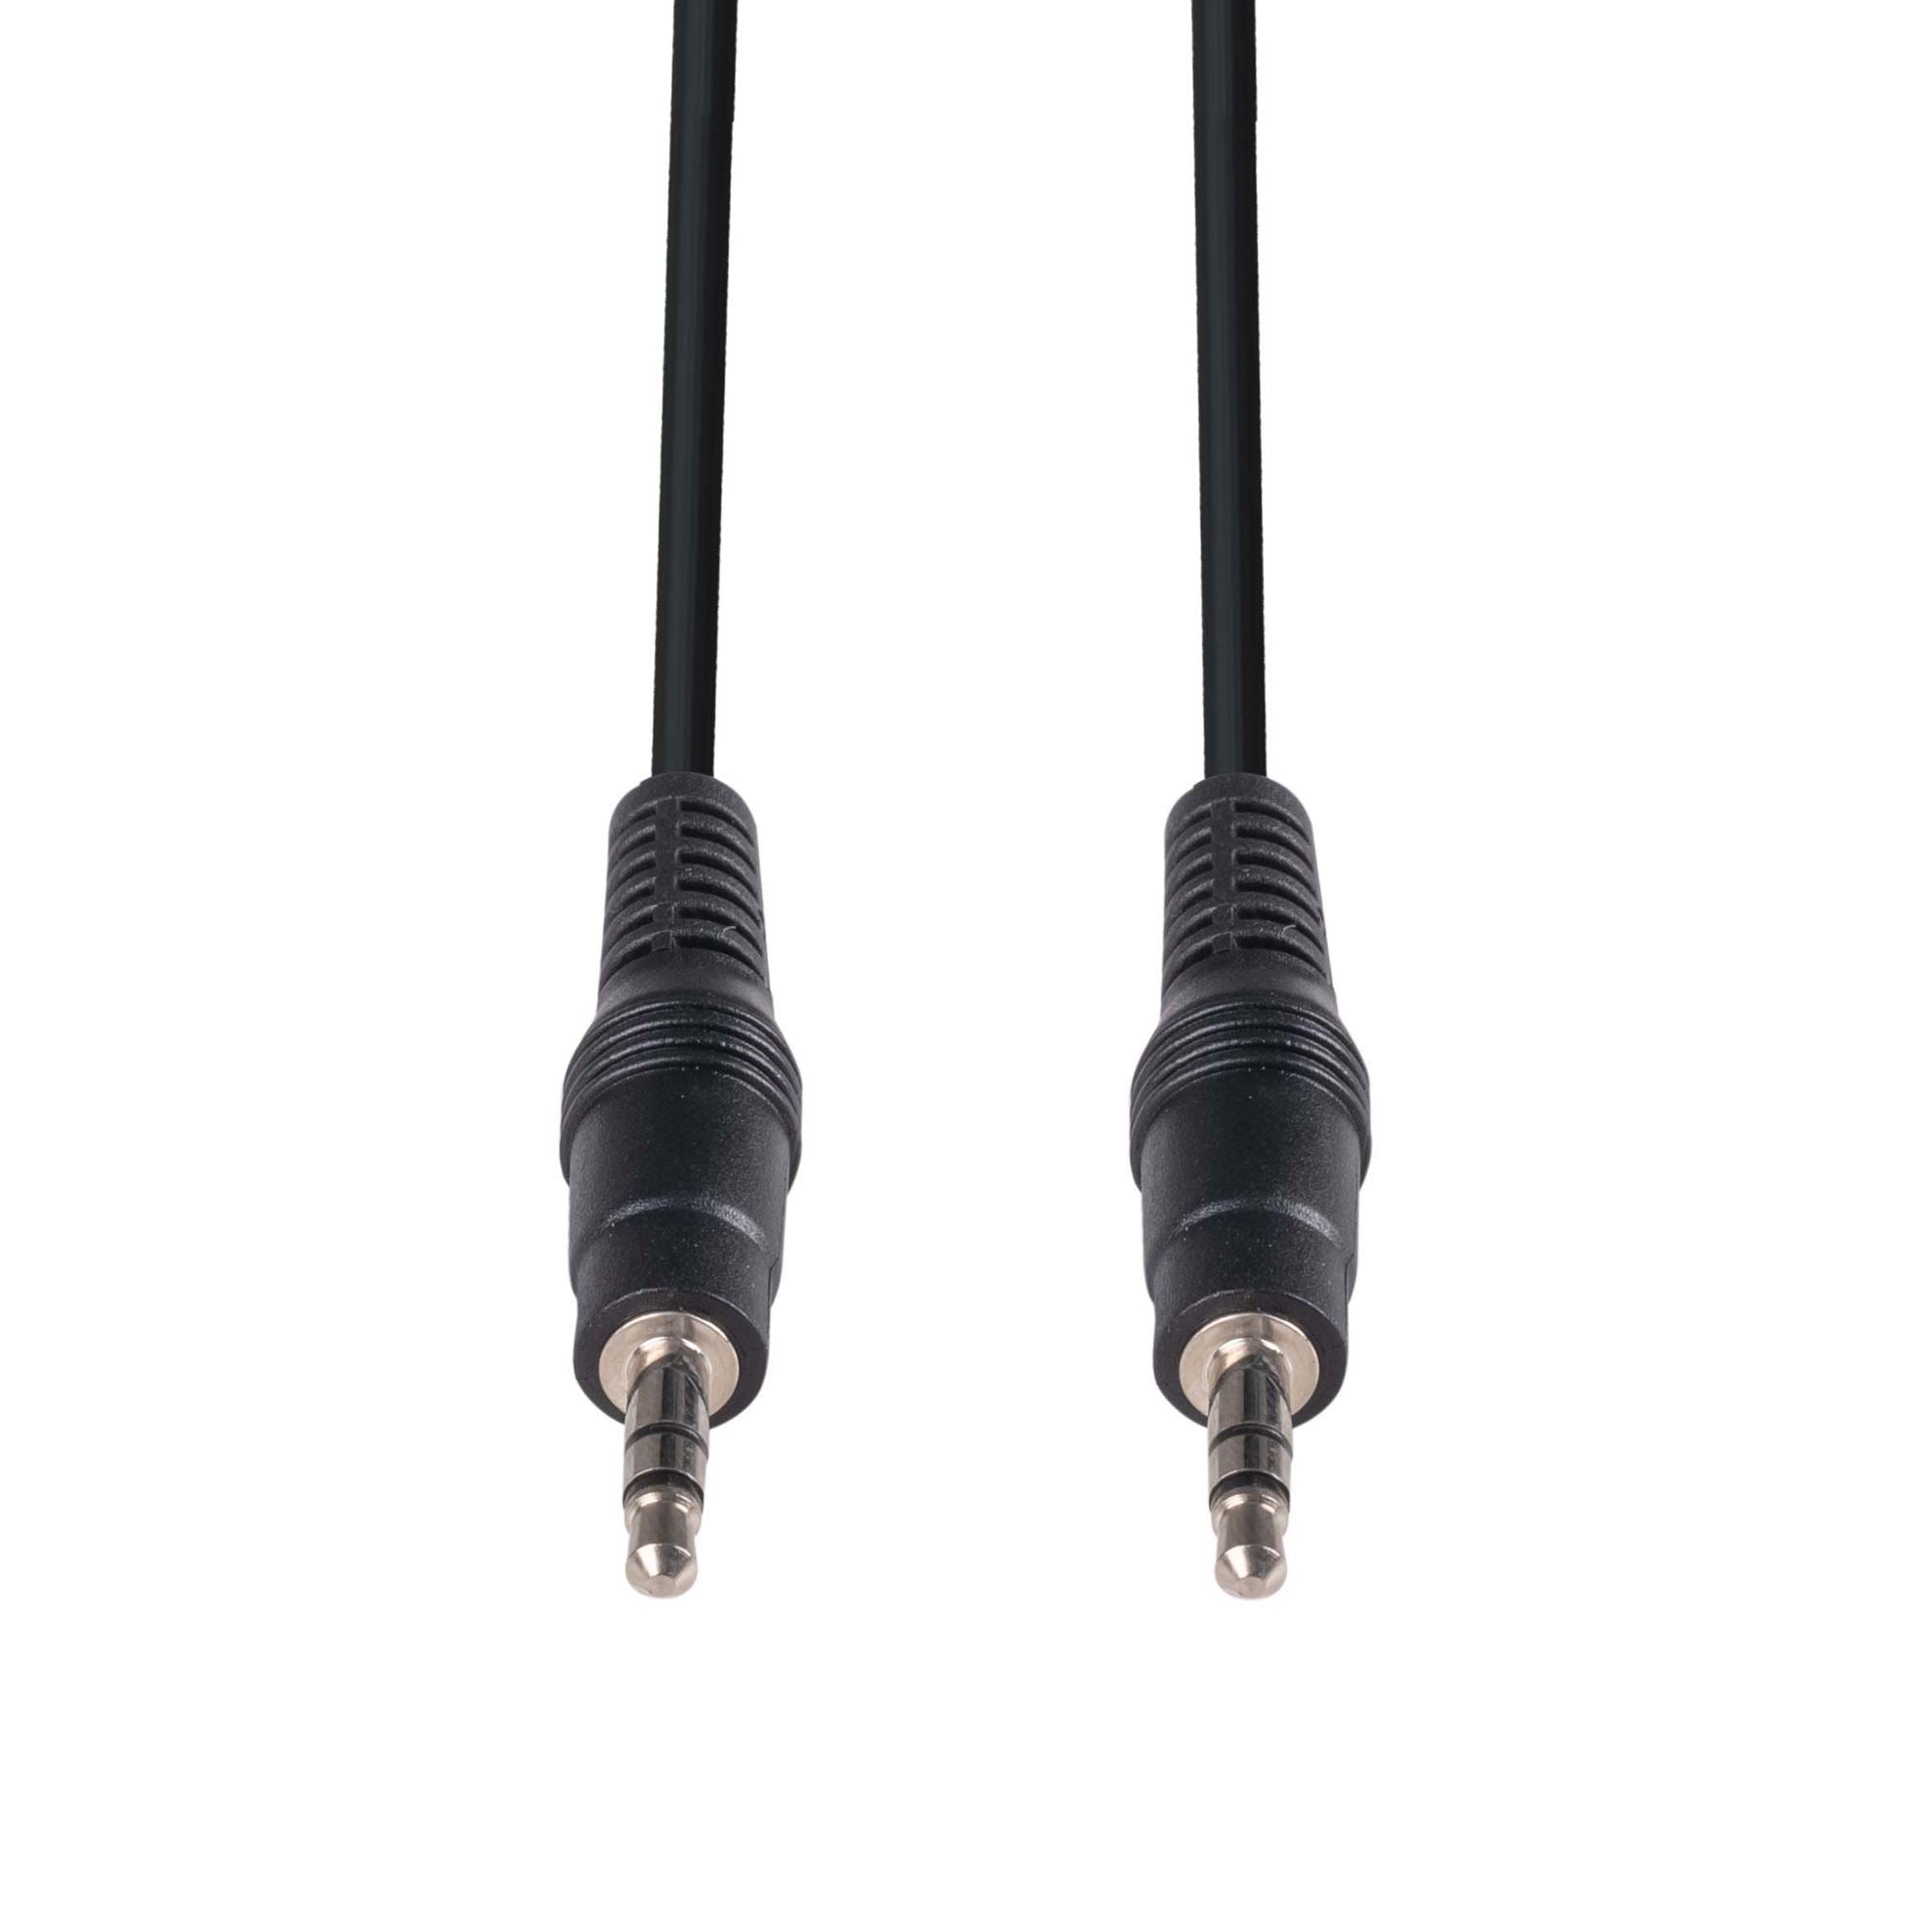 DYNAMIX_20M_Stereo_3.5mm_male_to_male_cable 488